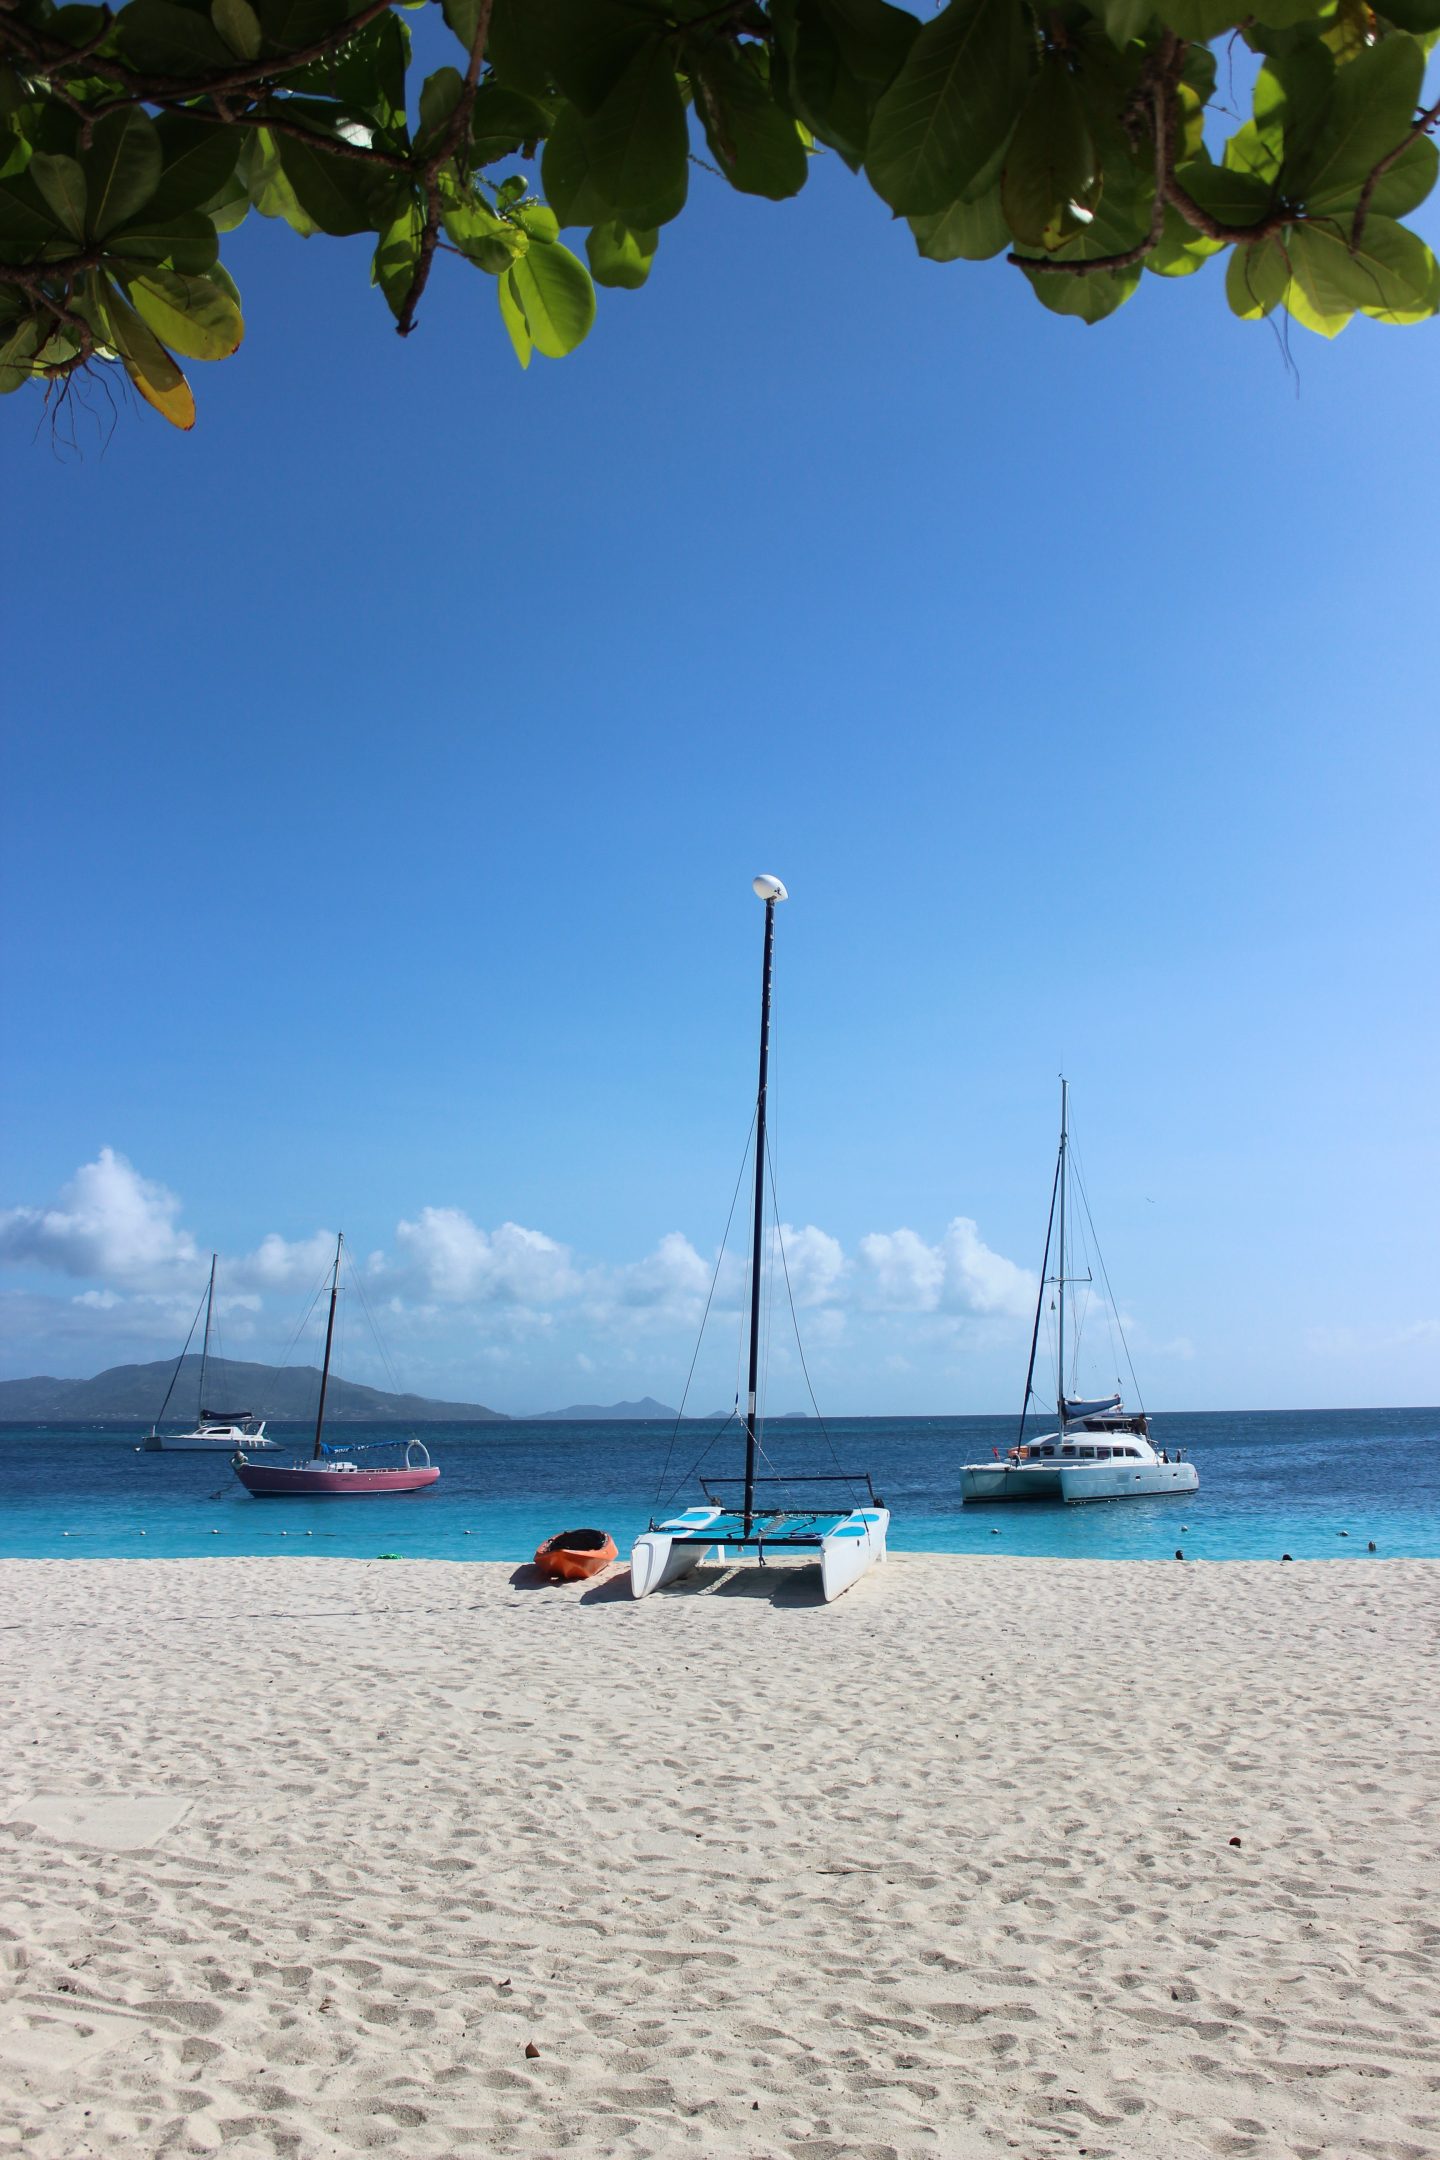 Clutch and carry on - UK Travel blogger - palm island resort, grenadines (314 of 361)